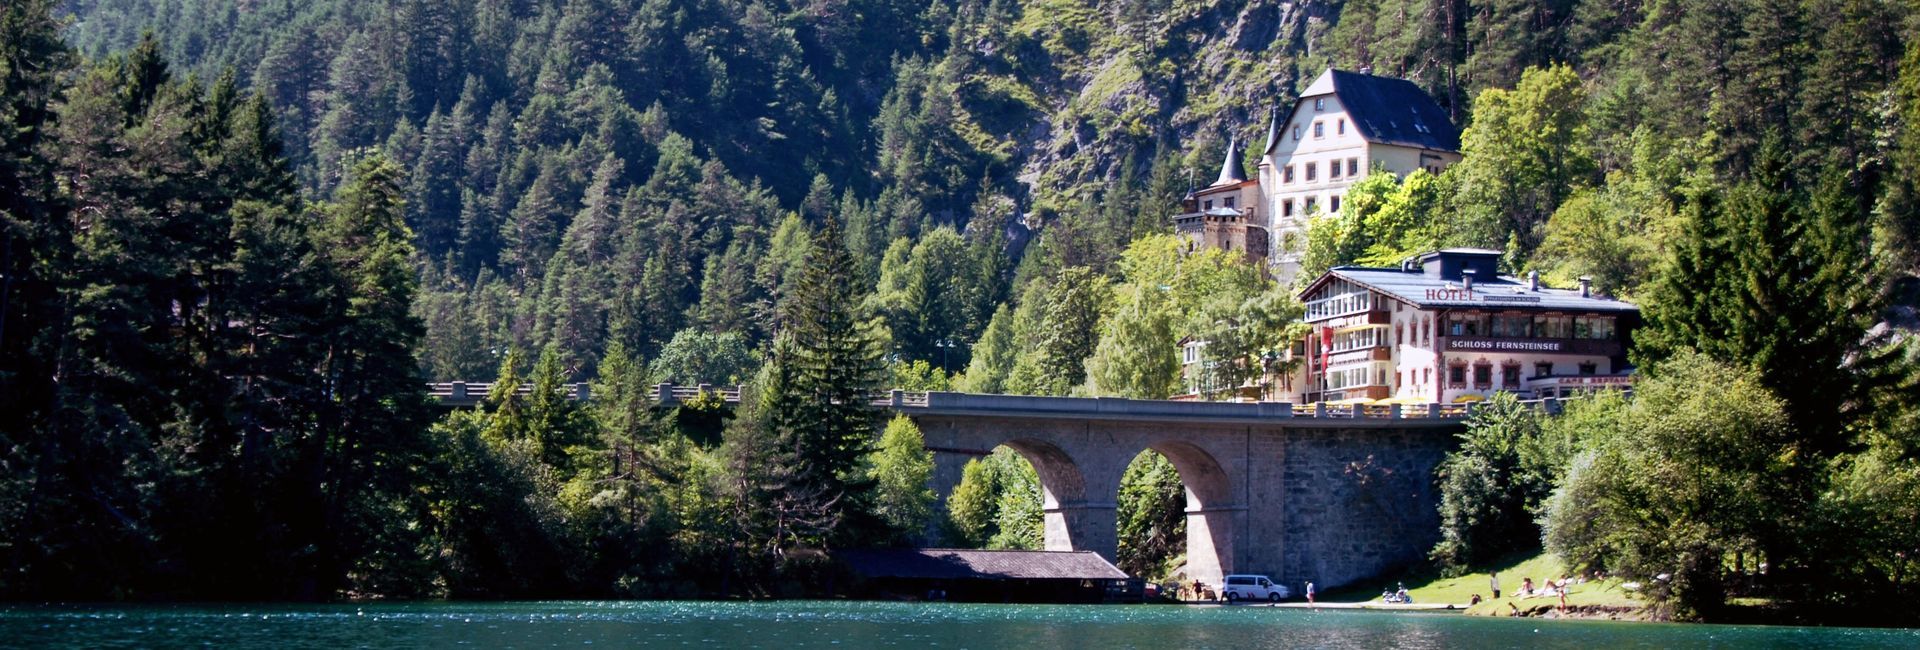 Hotel Schloss Fernsteinsee in Tyrol with lake and bridge